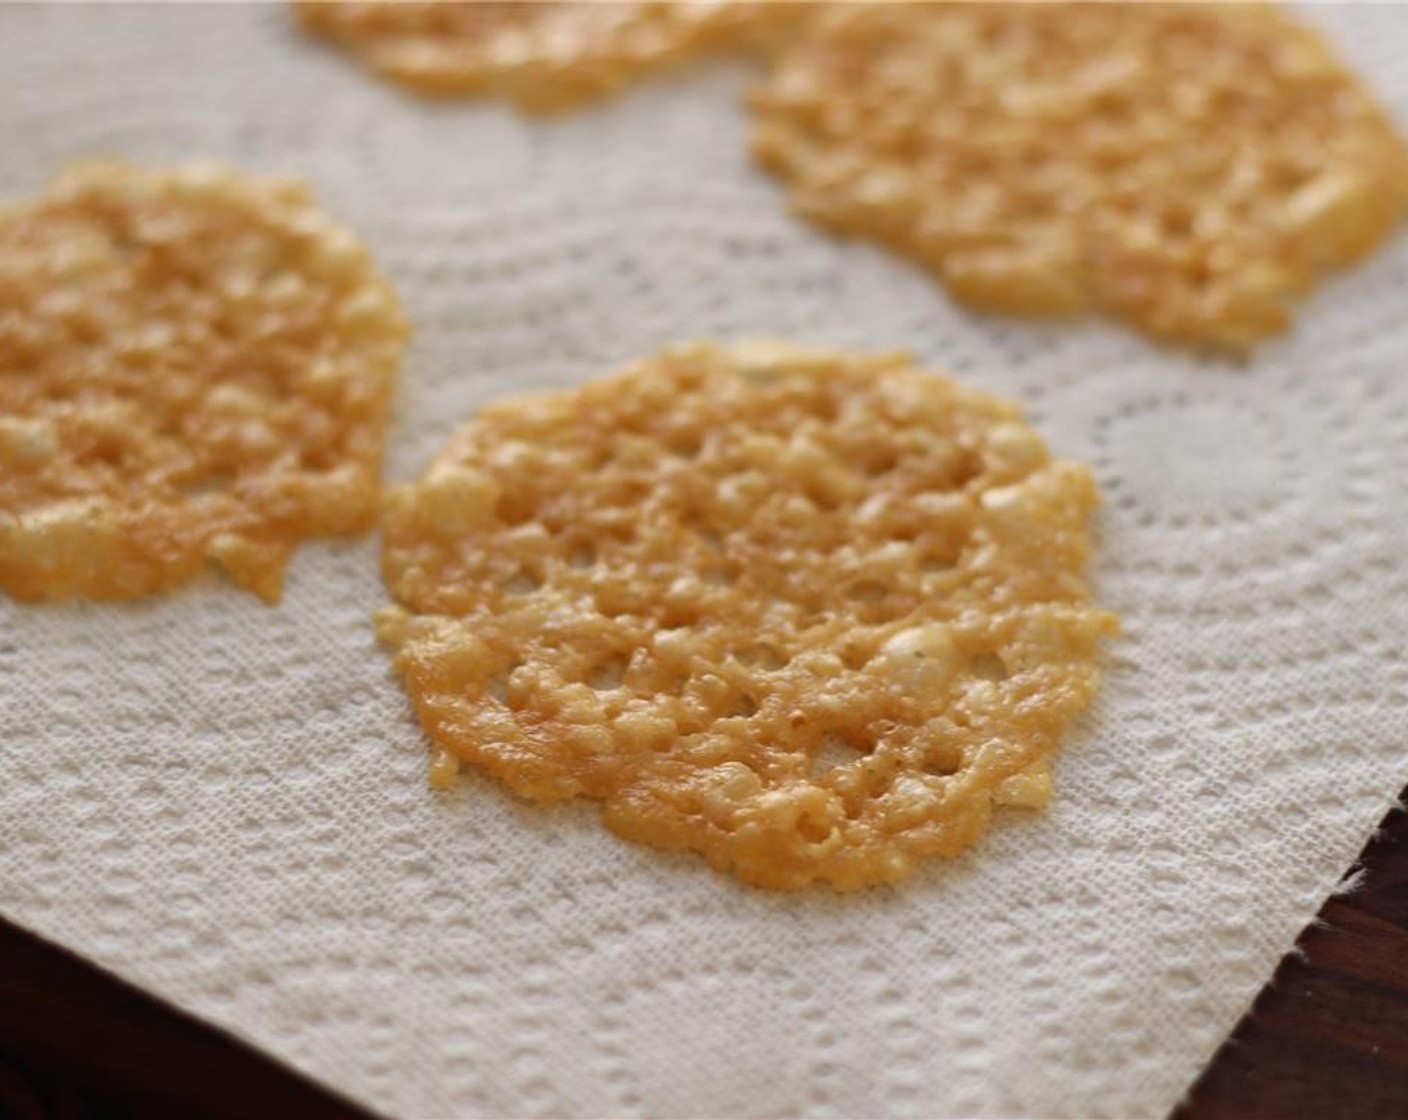 step 6 Slide the cookie sheet into the oven and bake for 4 minutes, or until crisp and golden. Transfer the crisps to a paper towel lined plate to cool and crisp up.